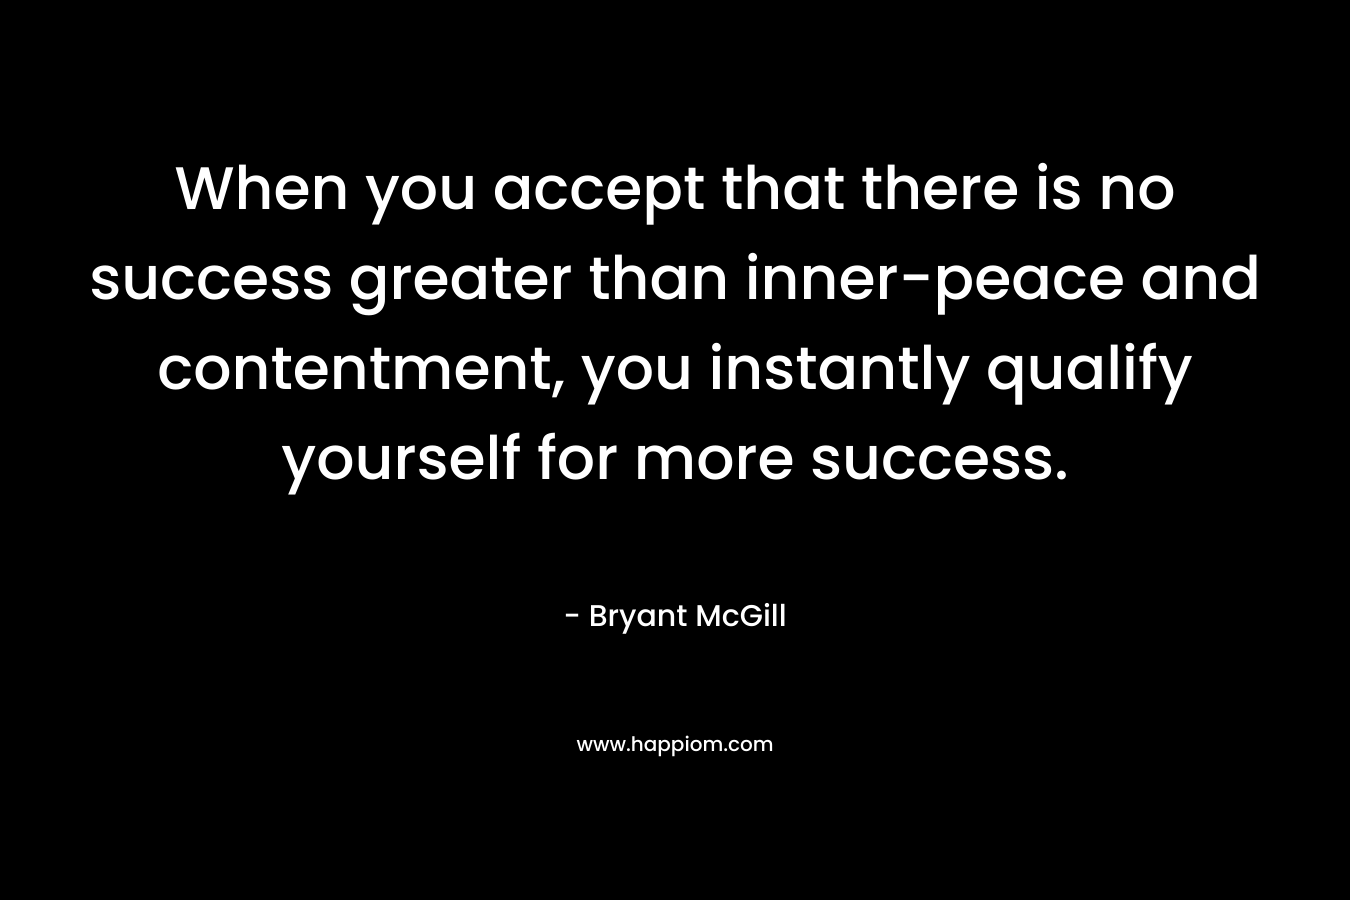 When you accept that there is no success greater than inner-peace and contentment, you instantly qualify yourself for more success. – Bryant McGill